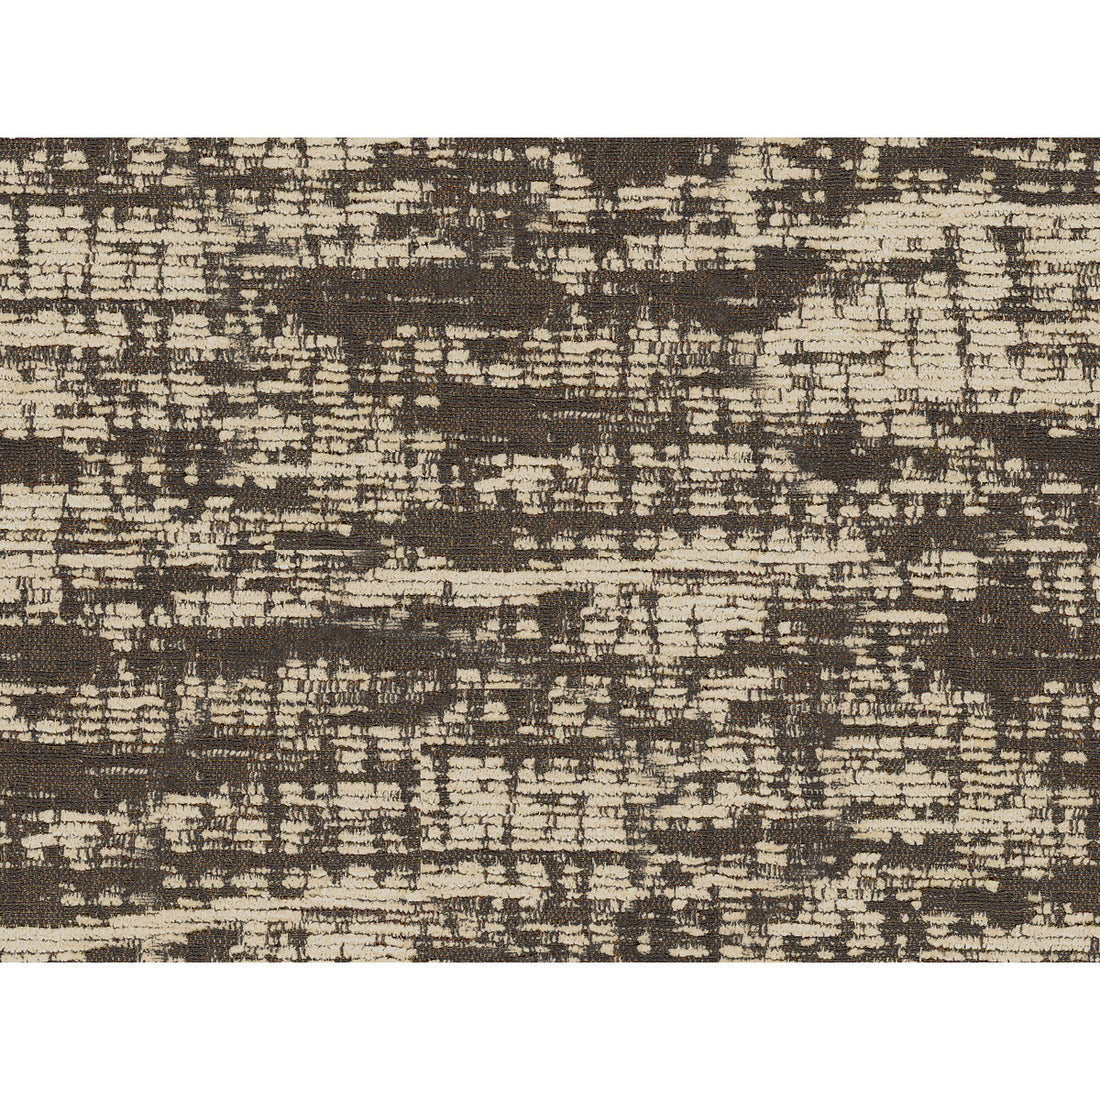 Whisk fabric in light shadow color - pattern GWF-3719.168.0 - by Lee Jofa Modern in the Kelly Wearstler Textures collection